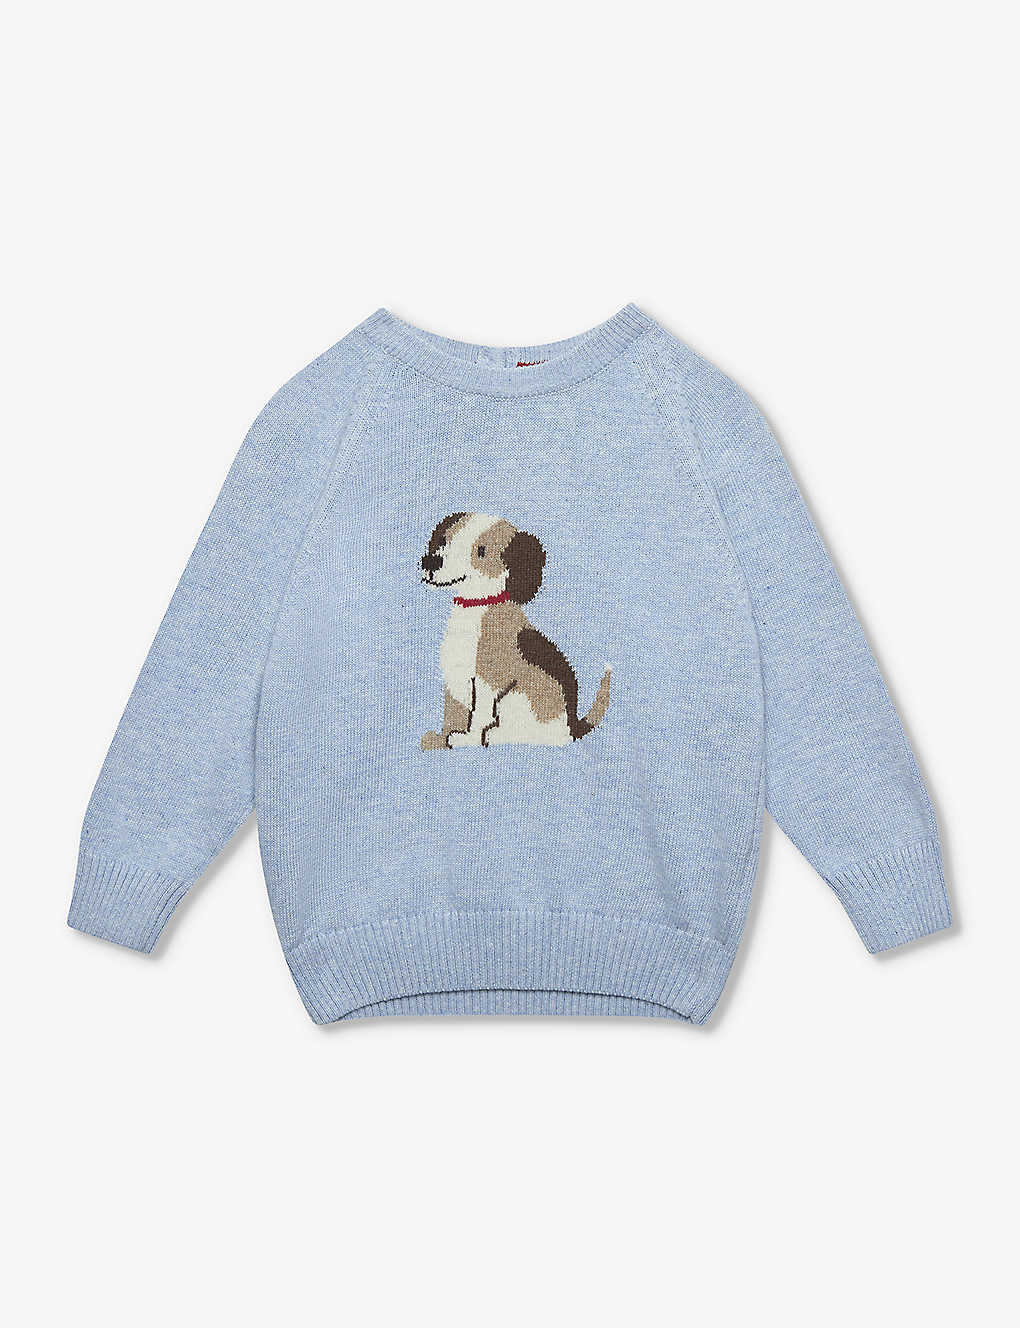 Trotters Boys Blue Marl Kids Puppy Long-sleeve Relaxed-fit Cotton Jumper 3-24 Months